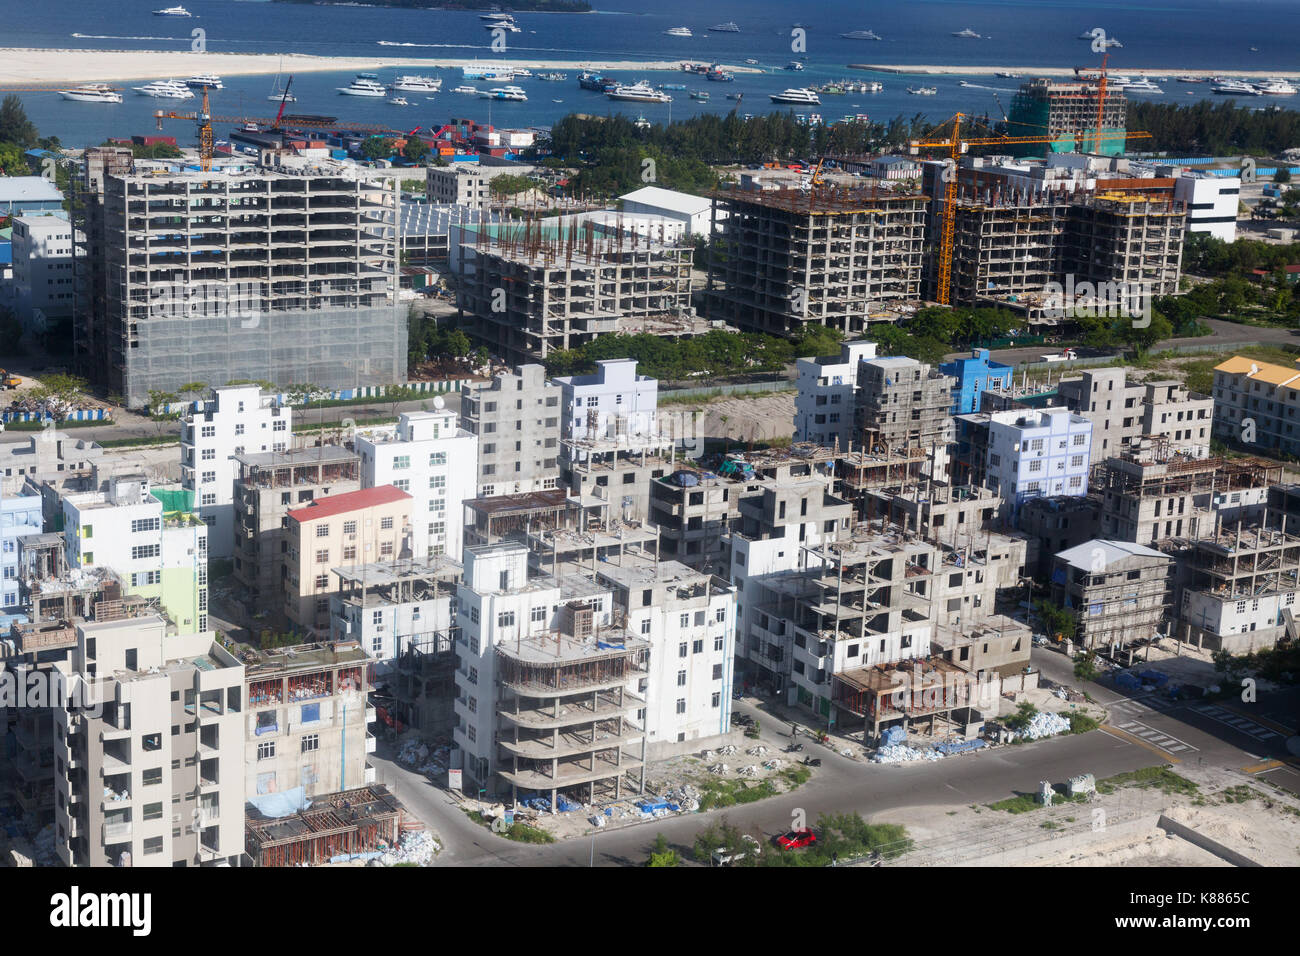 Maldives Construction - Construction of new buildings seen from above in Male, the capital city, the Maldives, Asia Stock Photo